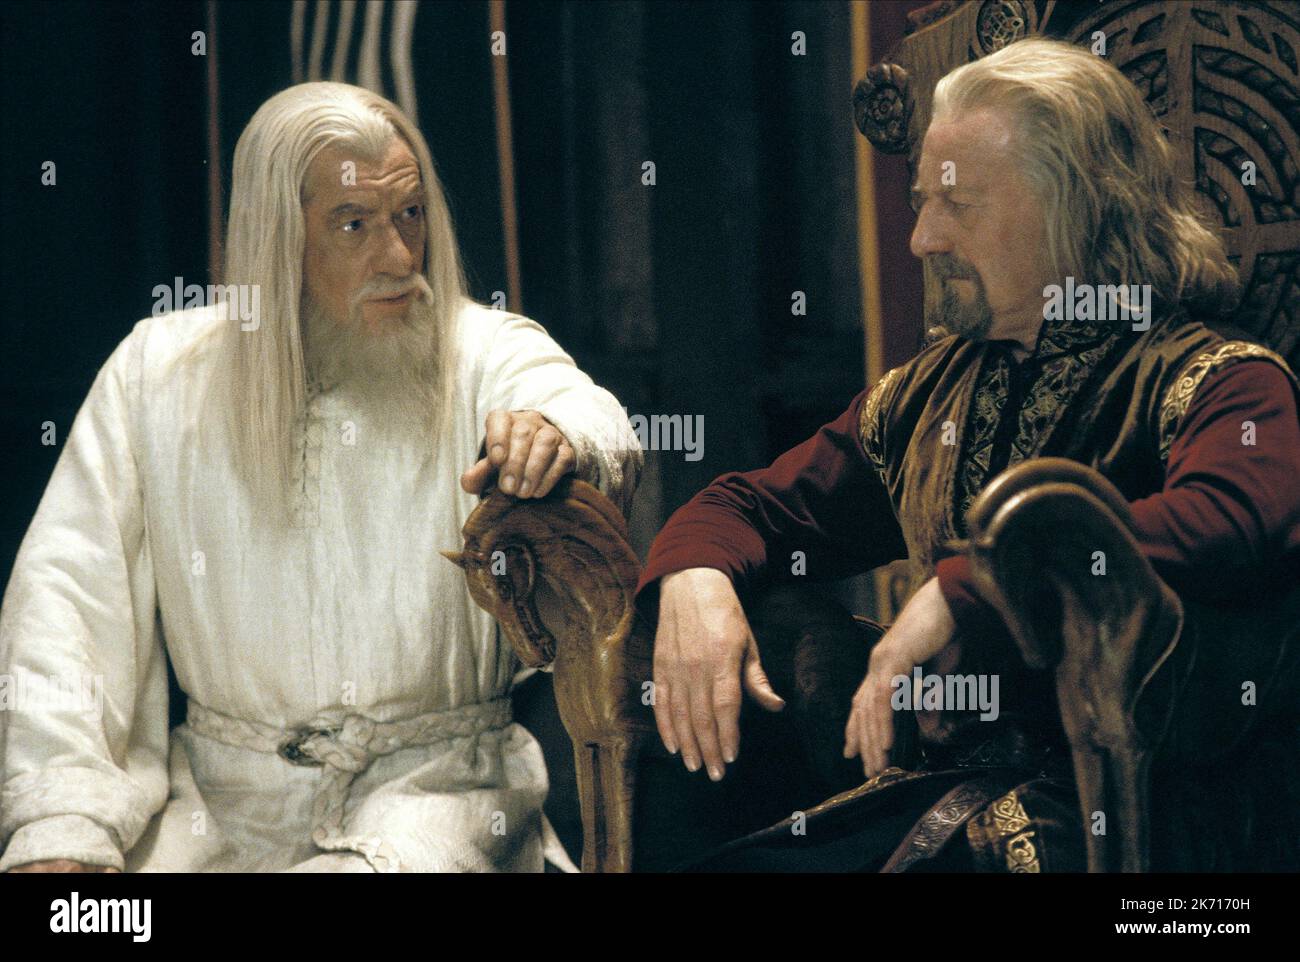 Lord of rings theoden -Fotos und -Bildmaterial in hoher Auflösung – Alamy